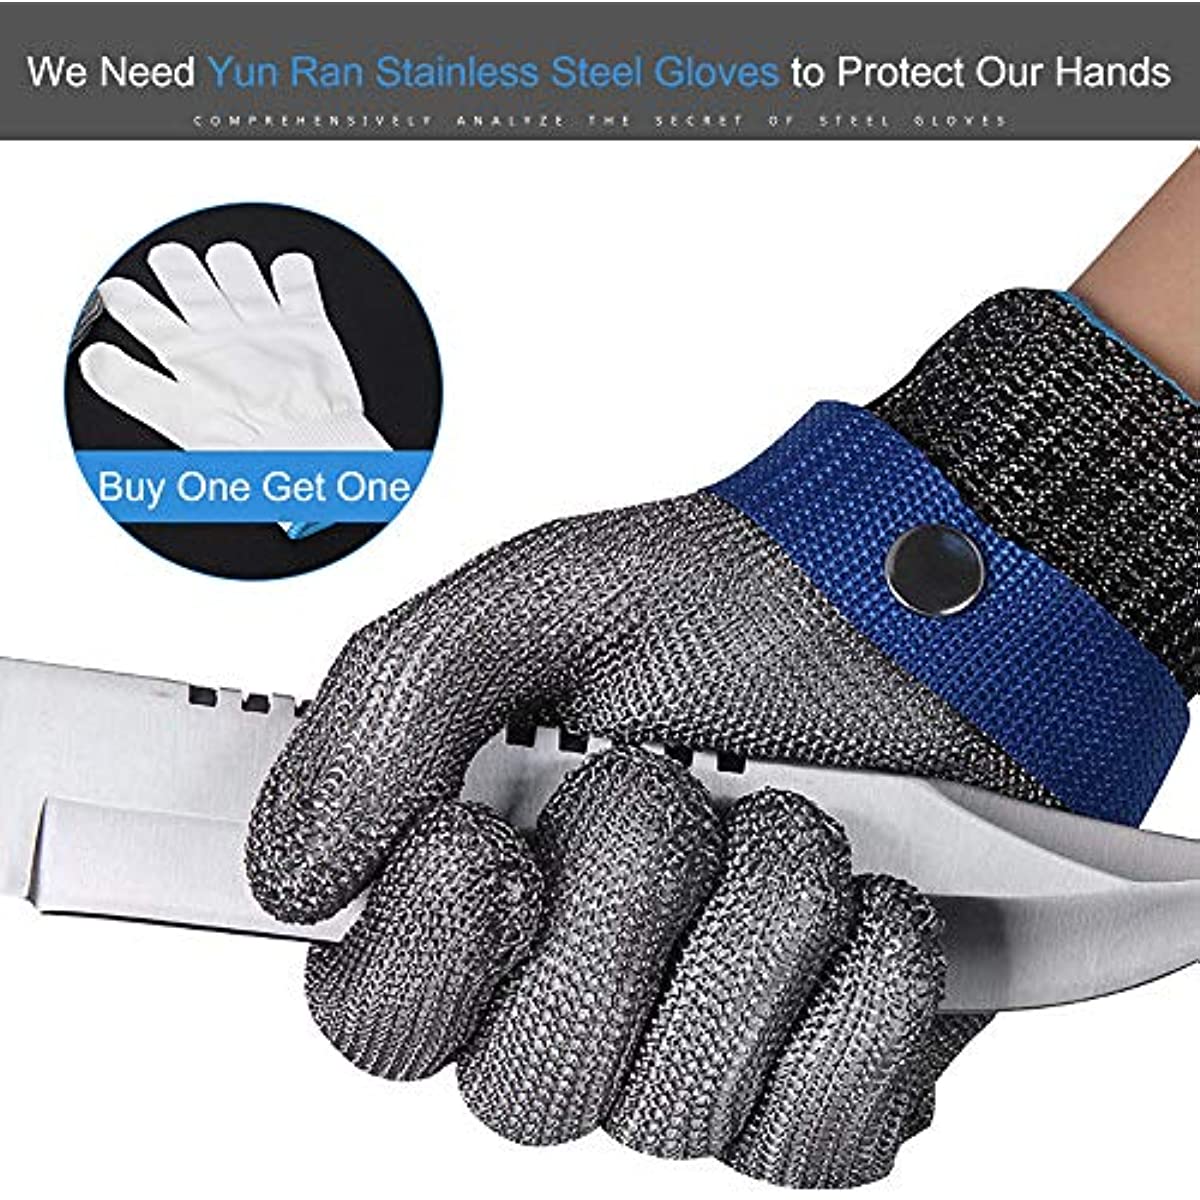 Level 5 Anti-Cut Glove 316 Stainless Steel Mesh Cut Resistant